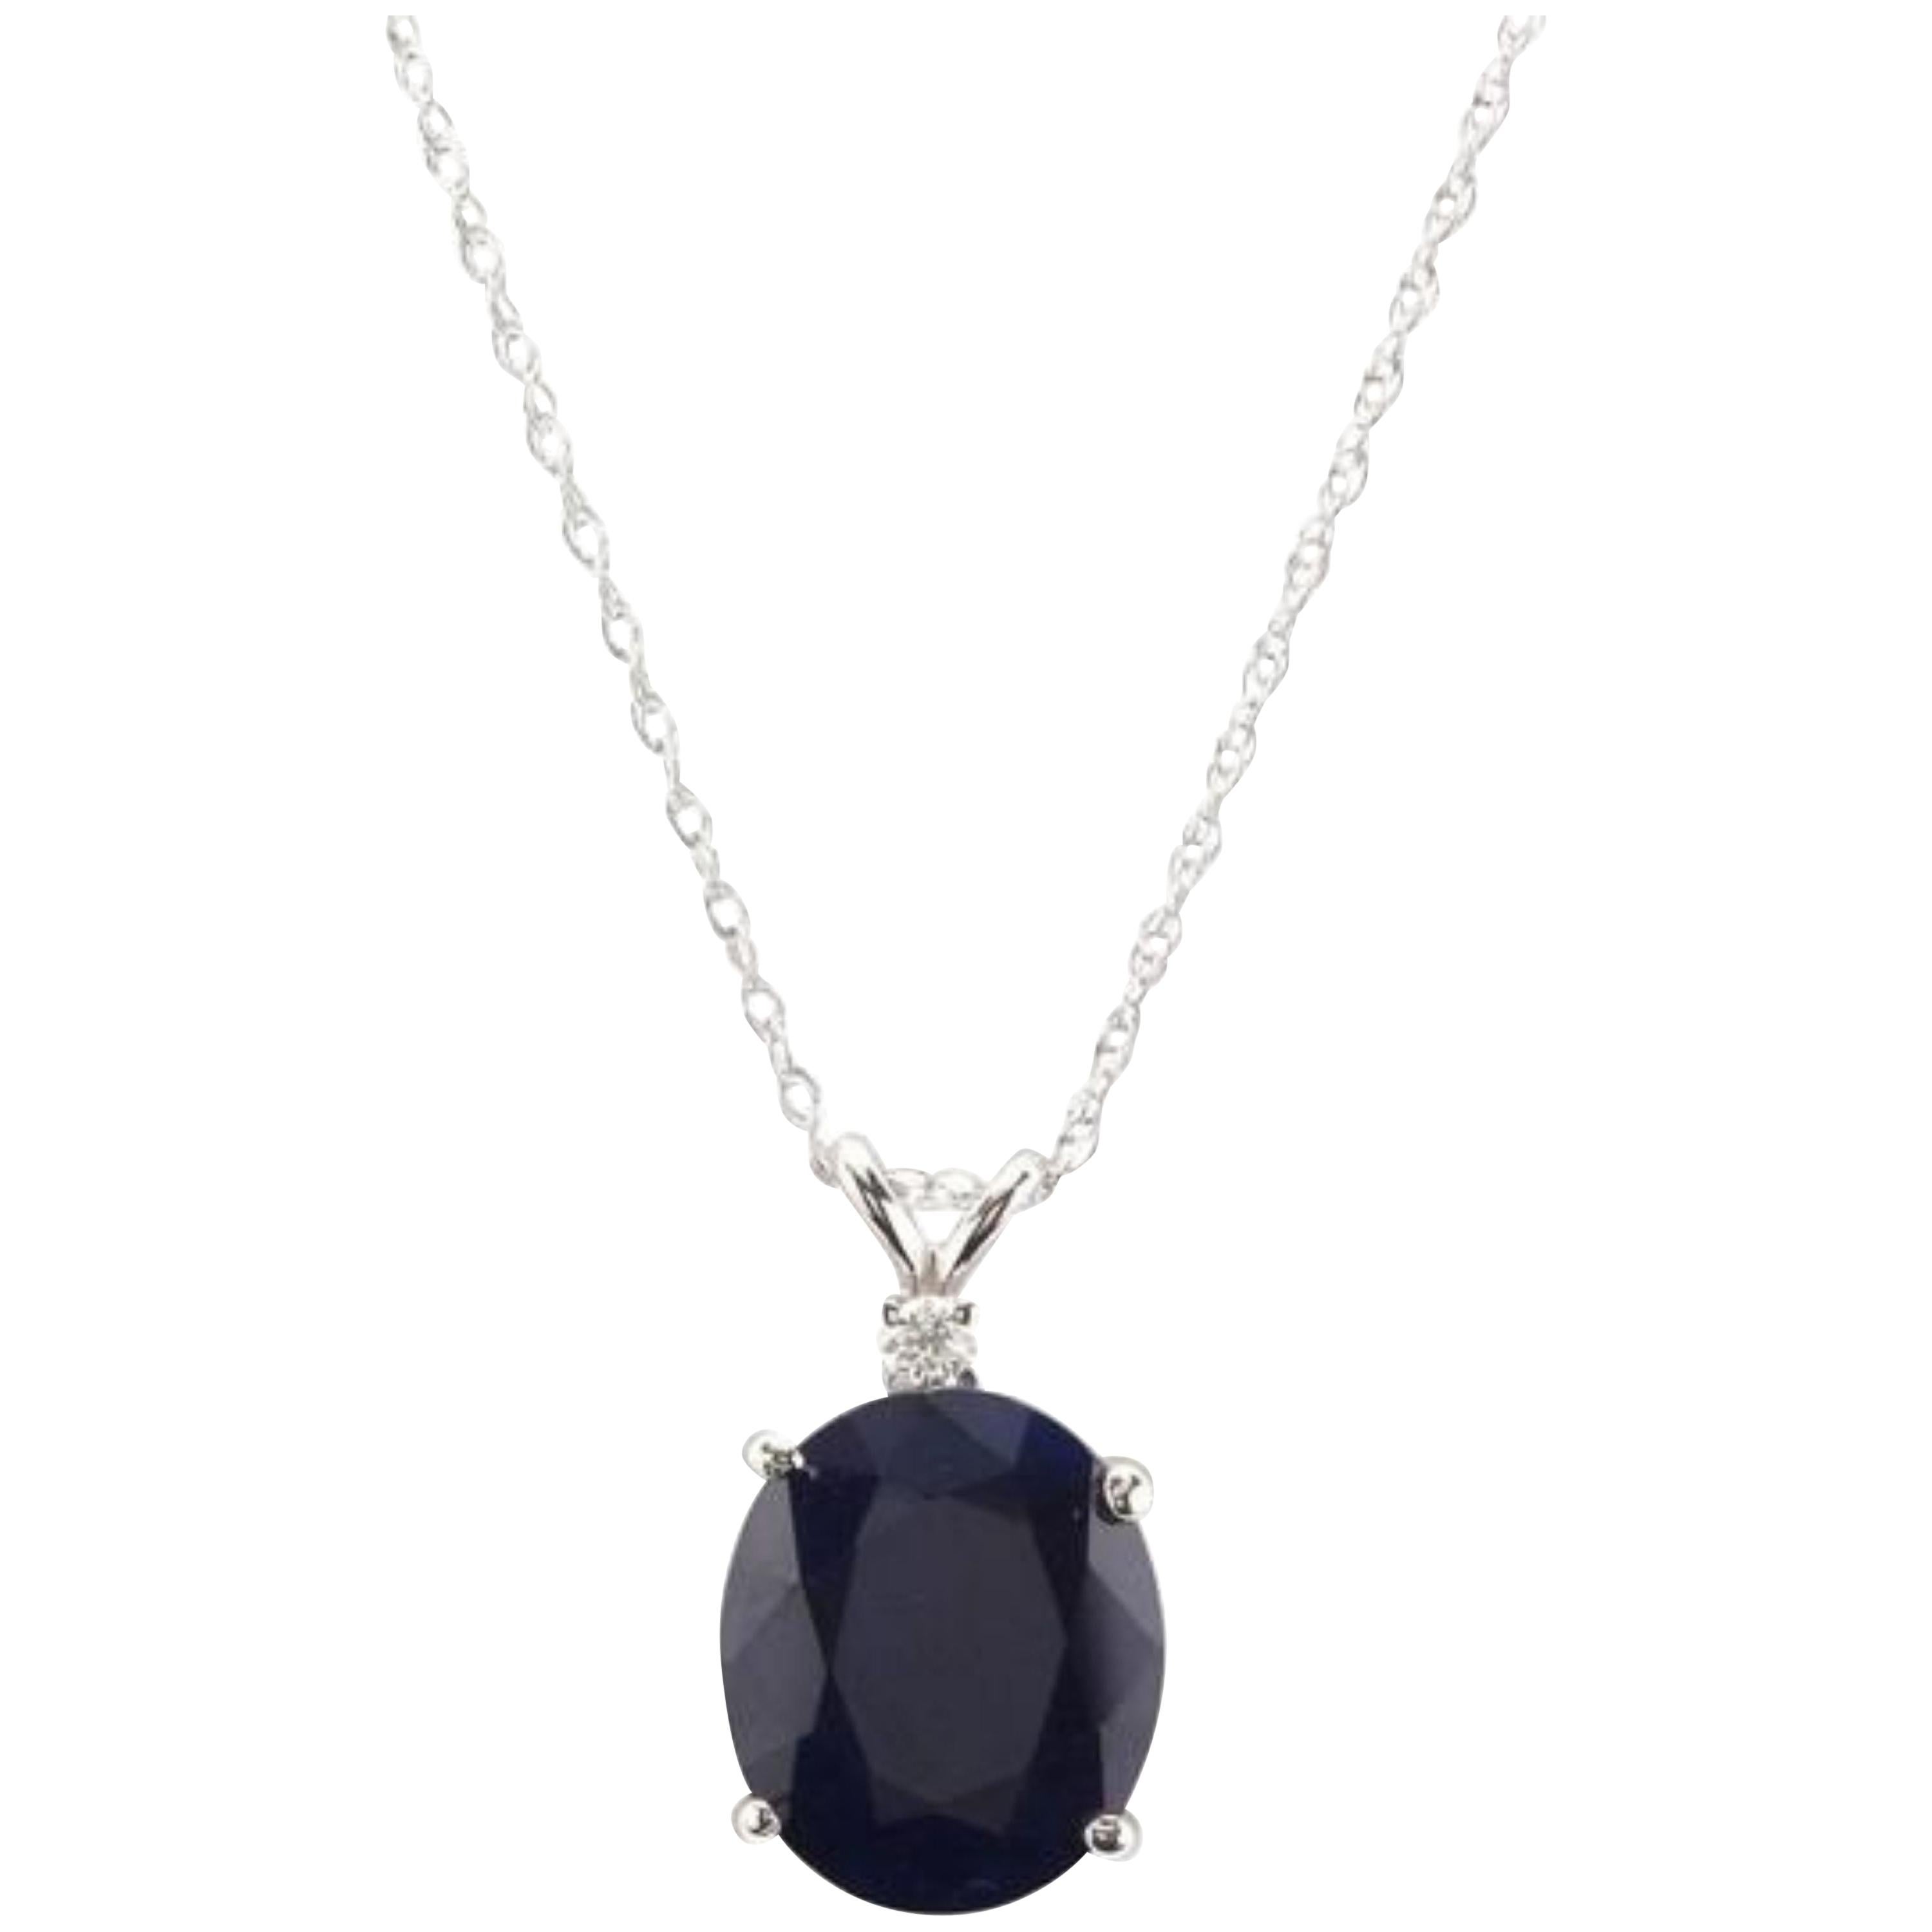 8.55 Carat Natural Sapphire and Diamond 14 Karat Solid White Gold Necklace